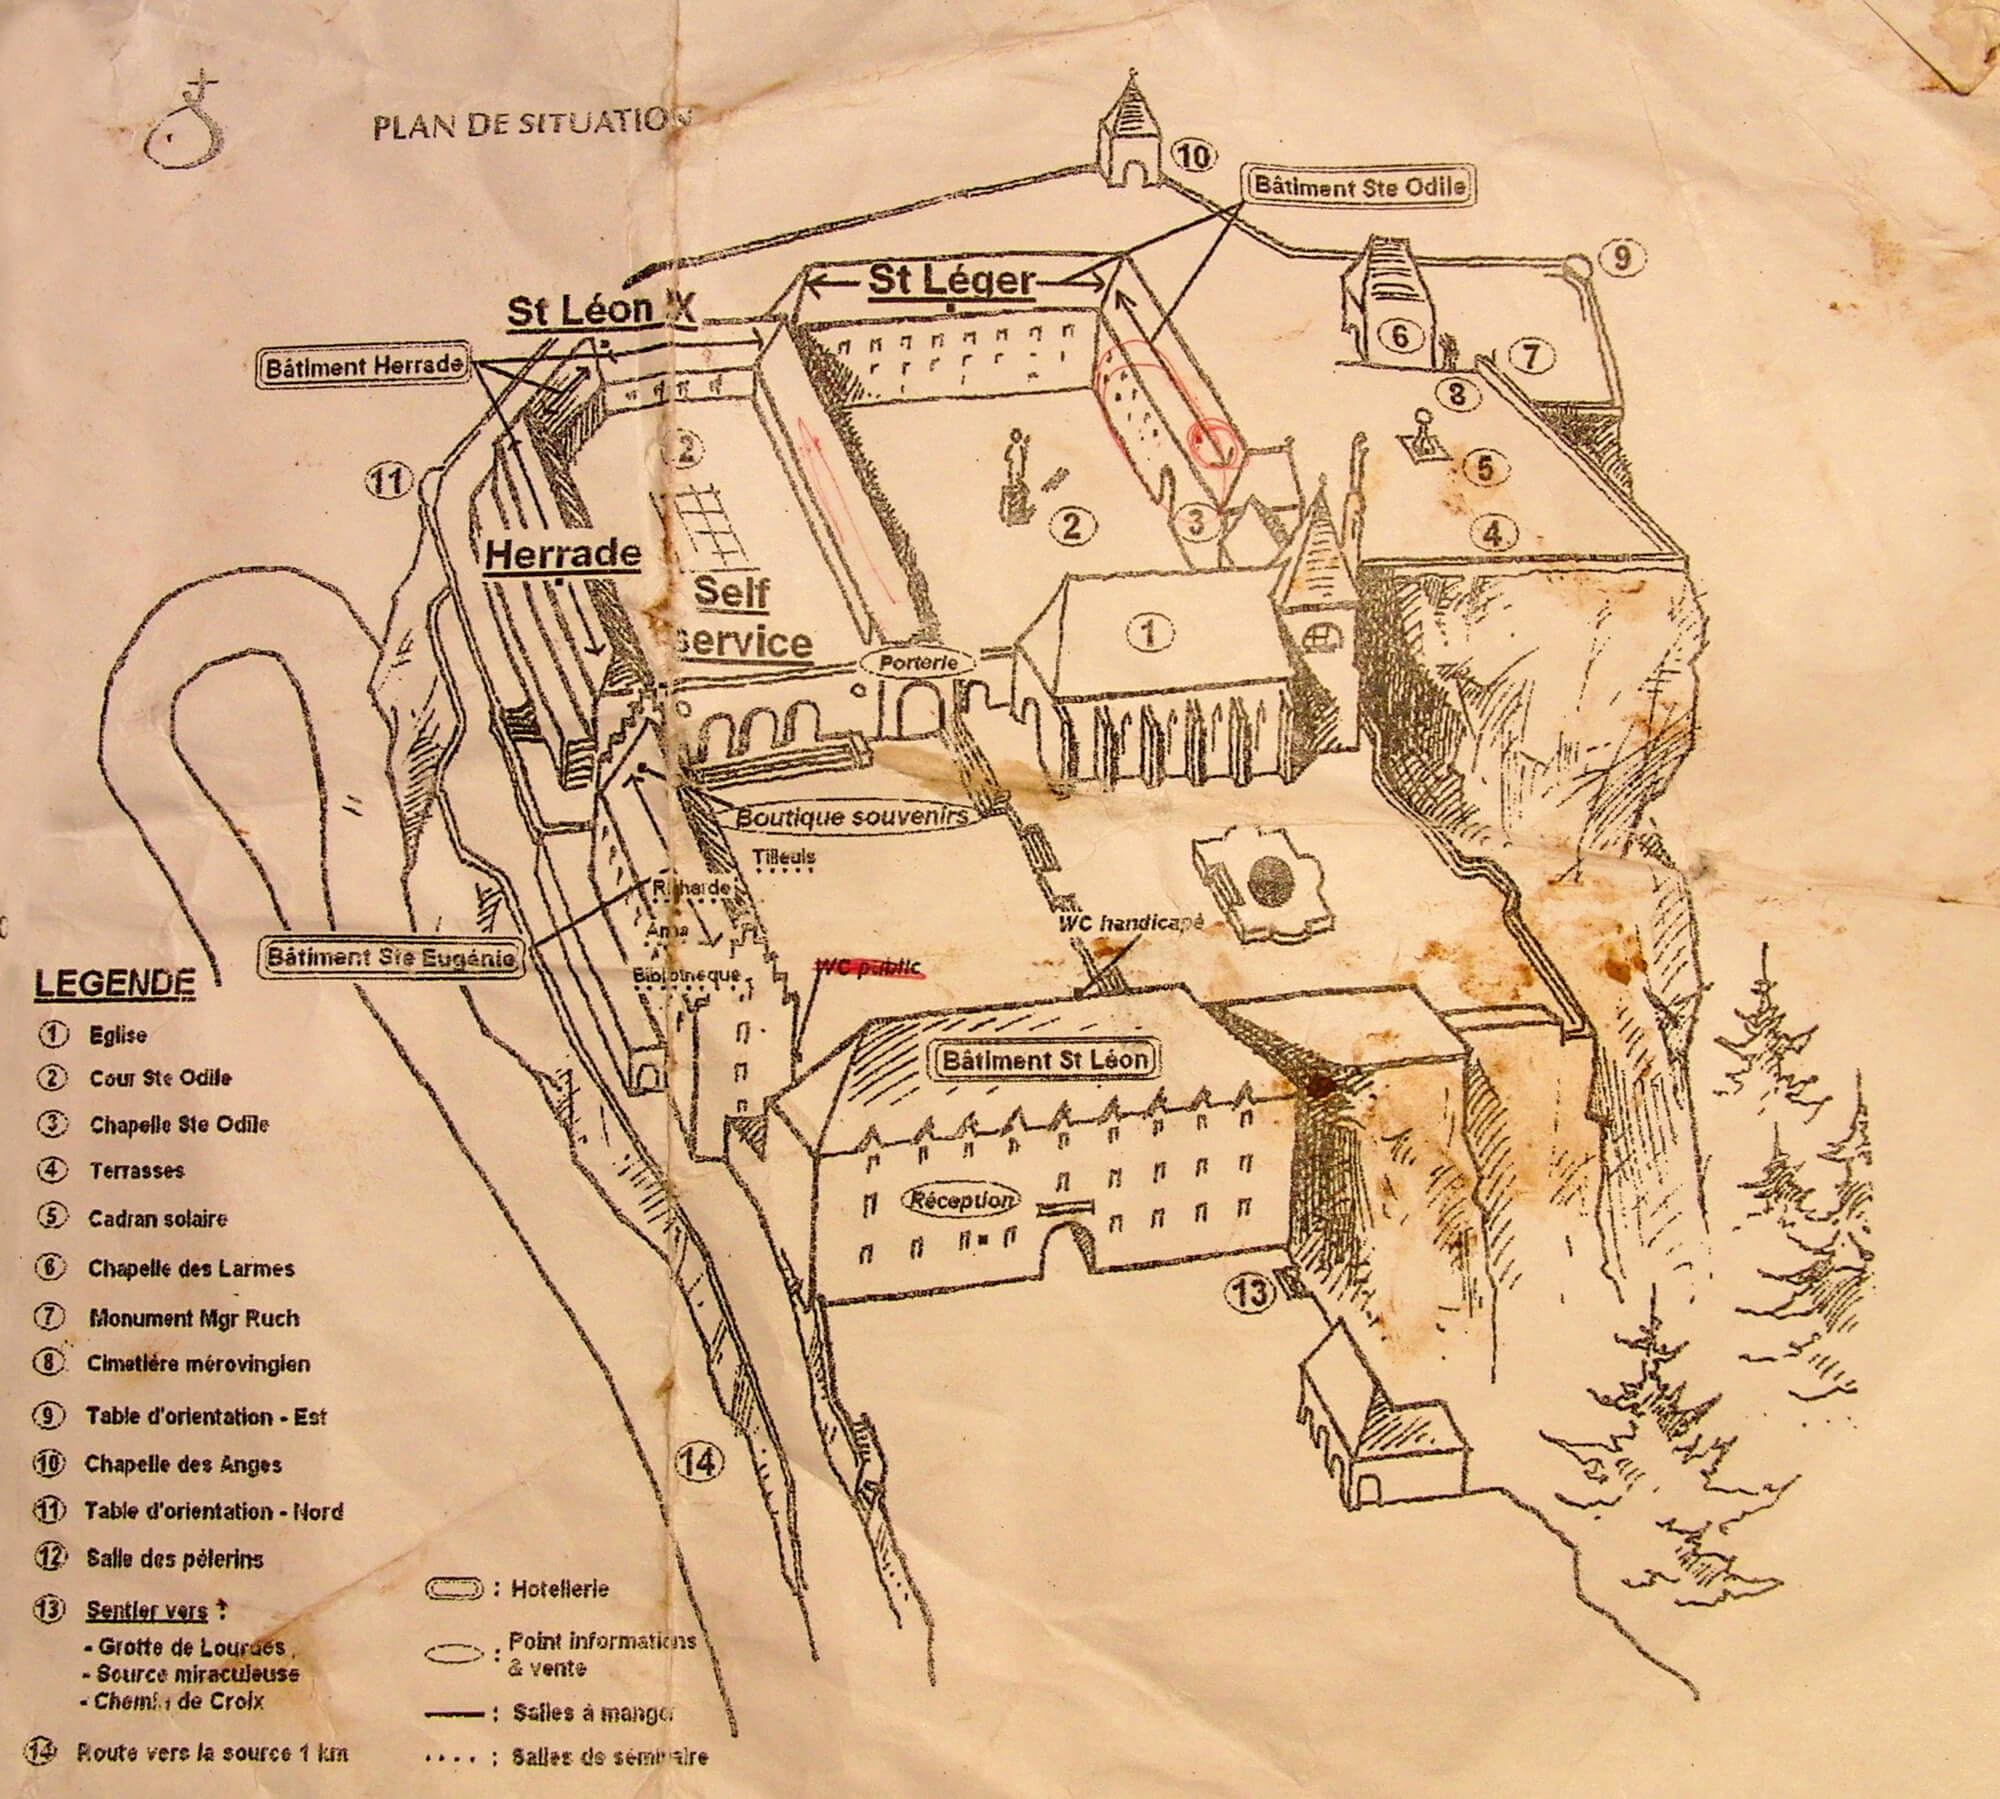 Map of monastery and adjoining hotel. This map was obtained and used by an amateur sleuth who visited the monastery in May 2011 looking for its secret passages. Courtesy adventurecycletour.wordpress.com.